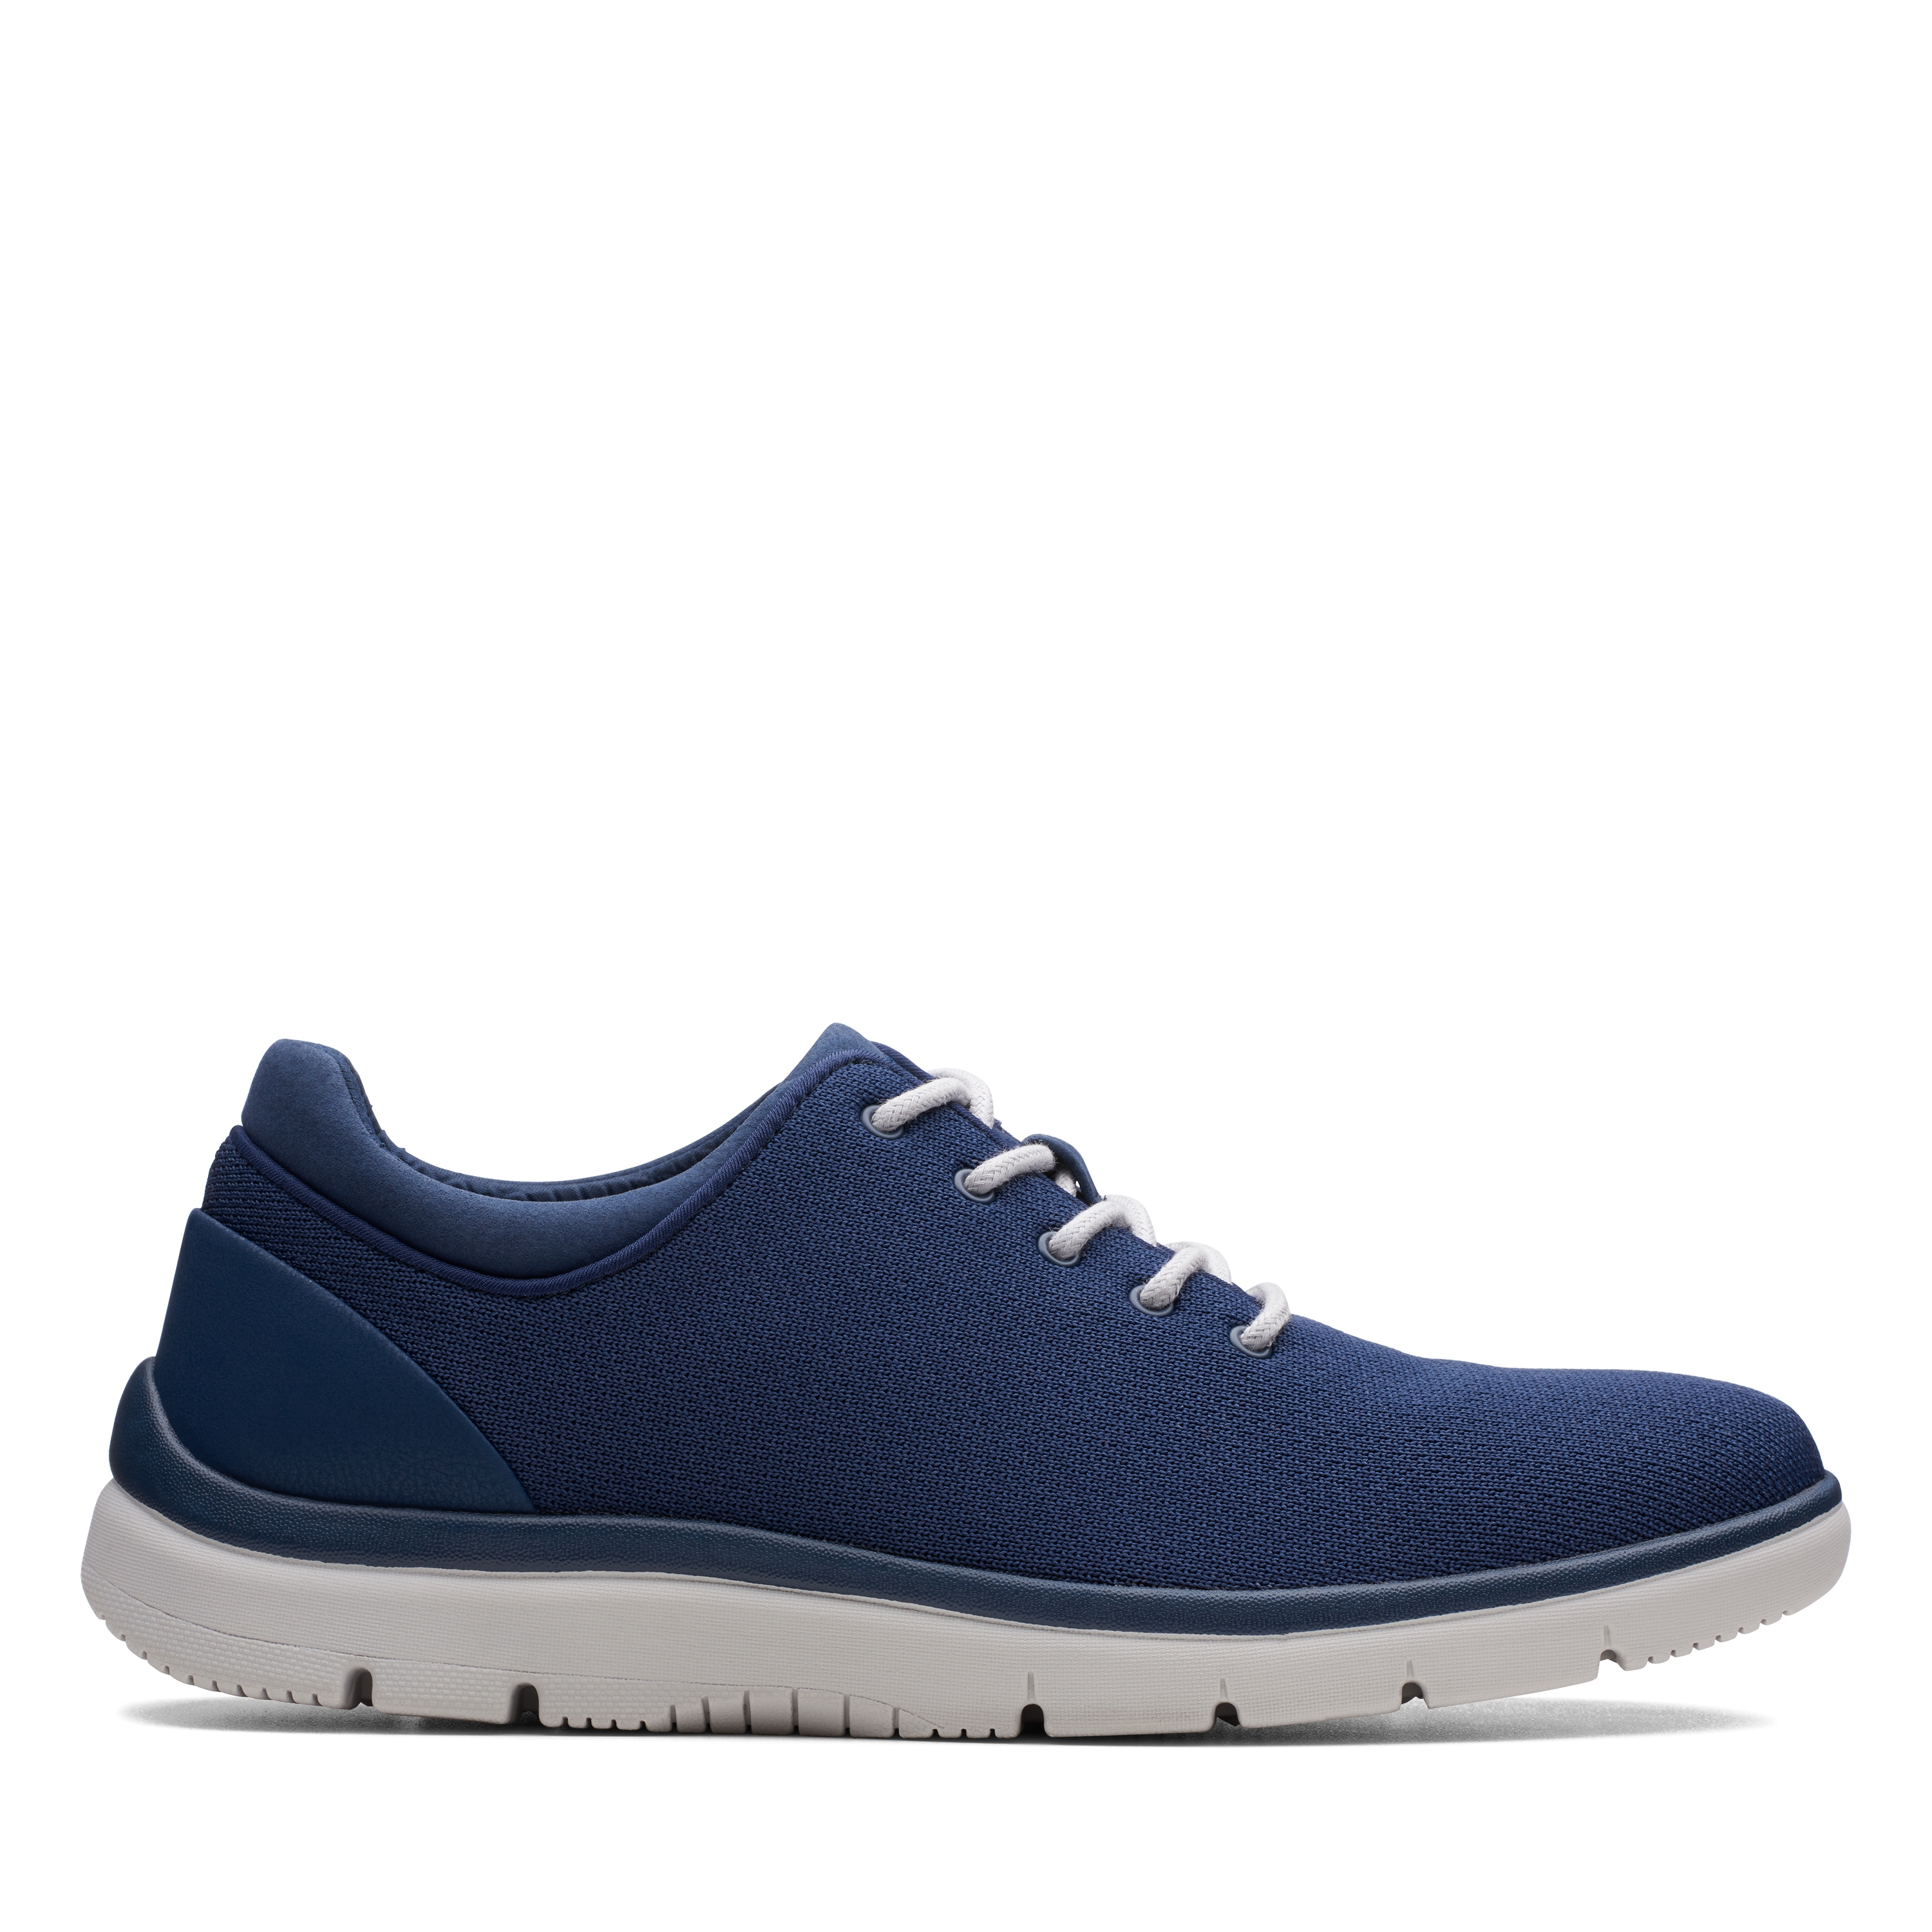 Clarks | Tunsil Ace Navy Textile Casual Lace-ups 